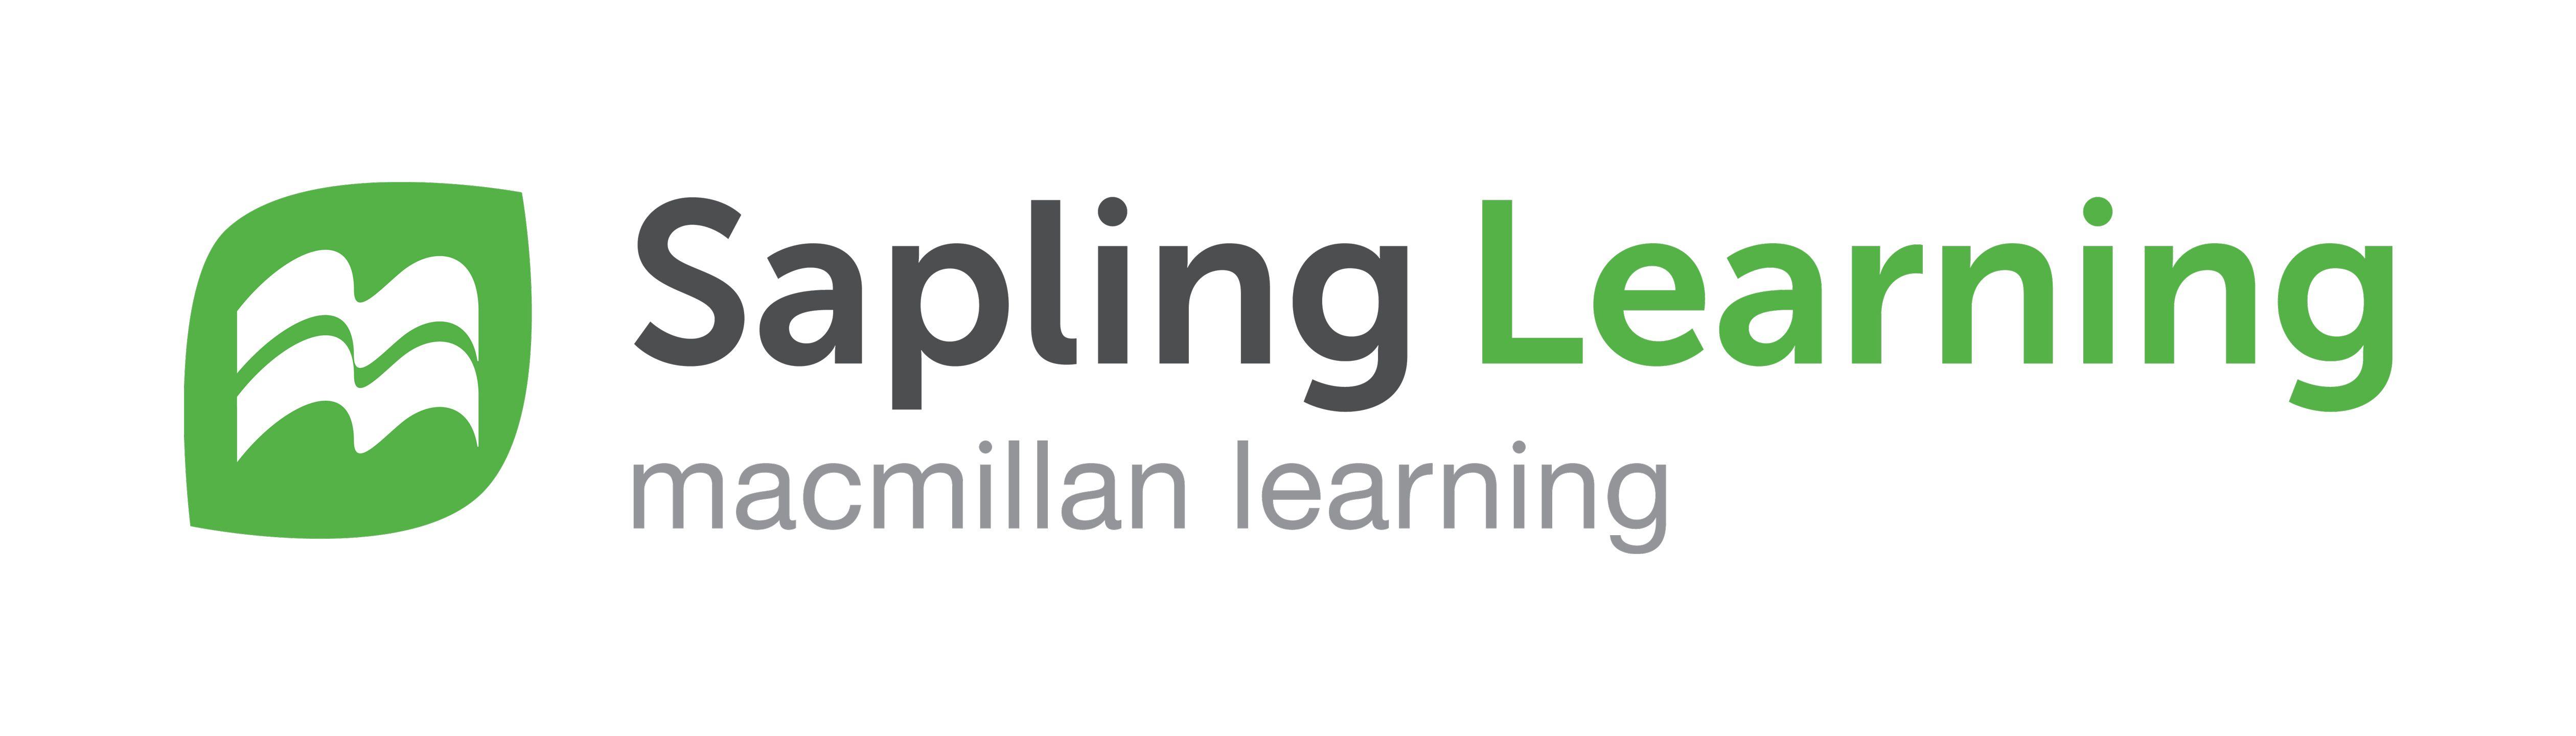 Calculus Logo - Sapling Learning Single Course Homework for Calculus Based Physics ...